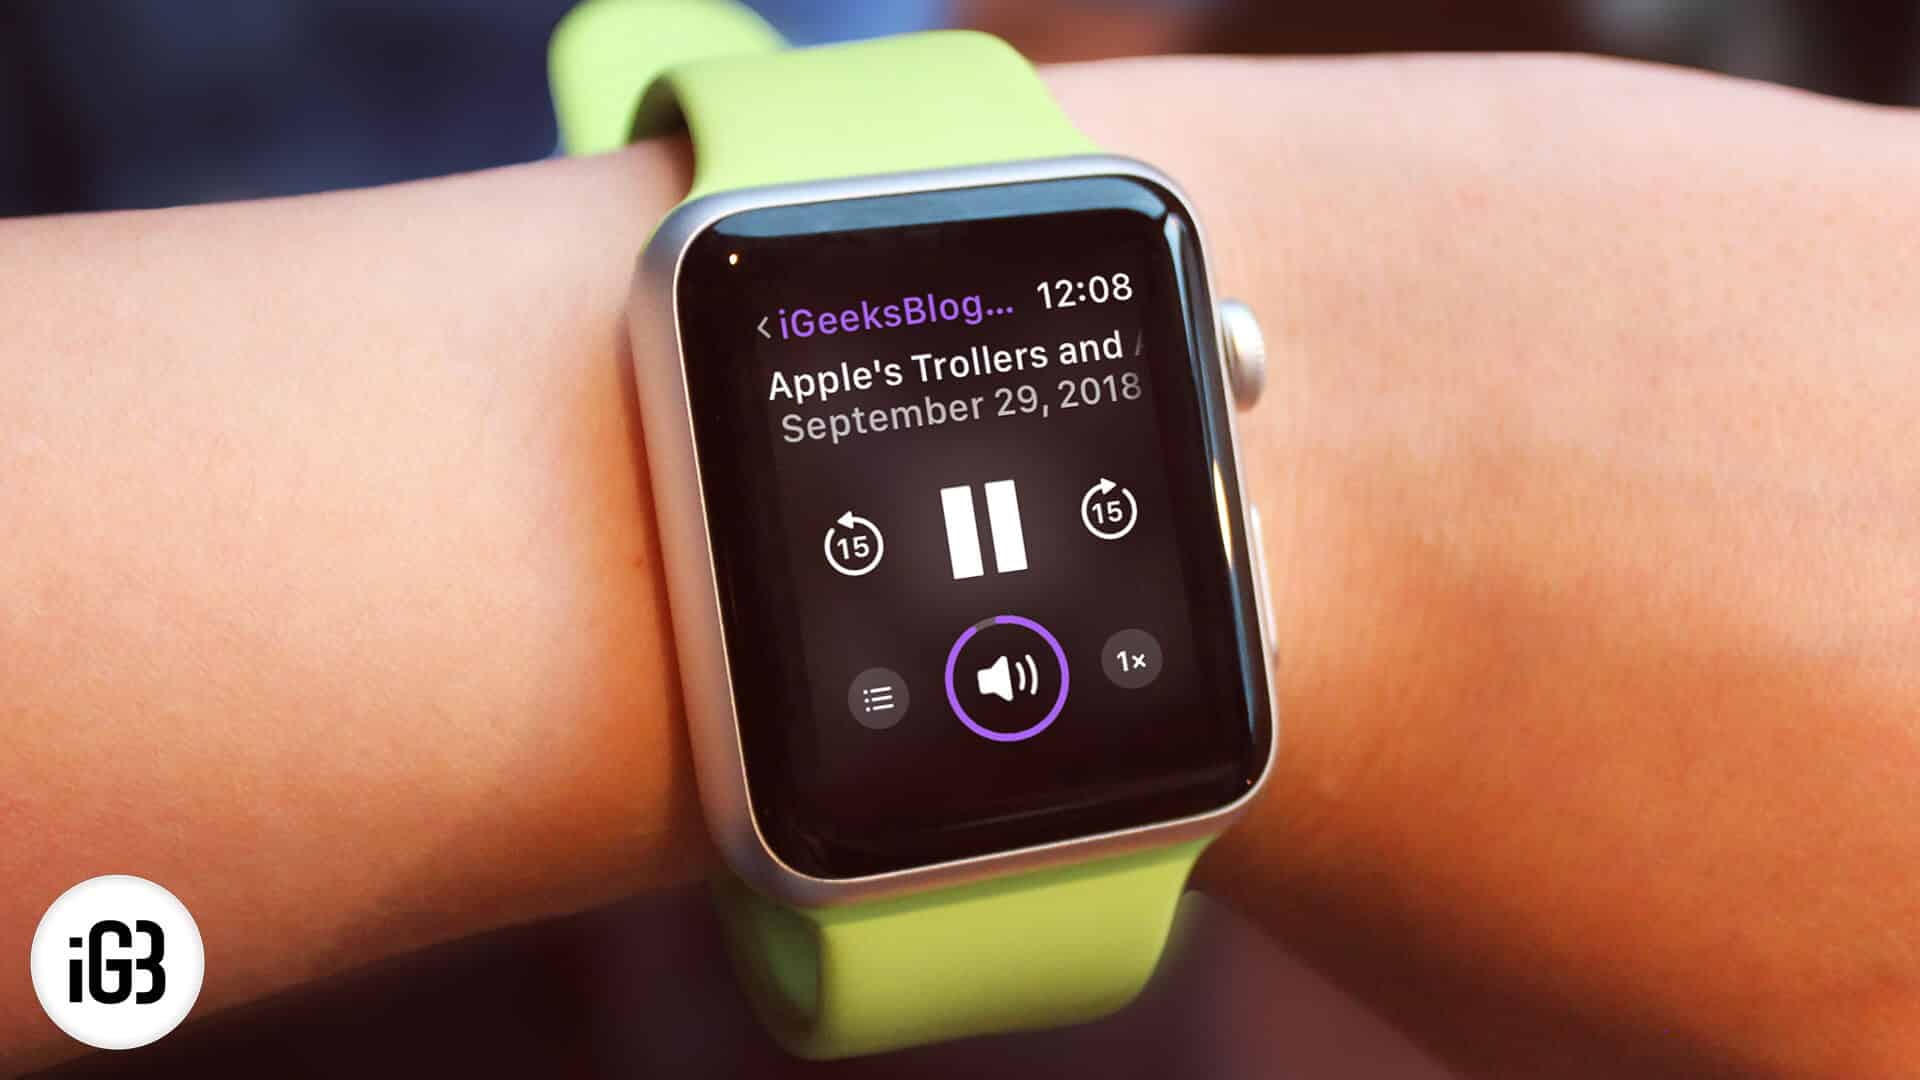 How to setup and listen to podcasts in watchos 5 on apple watch